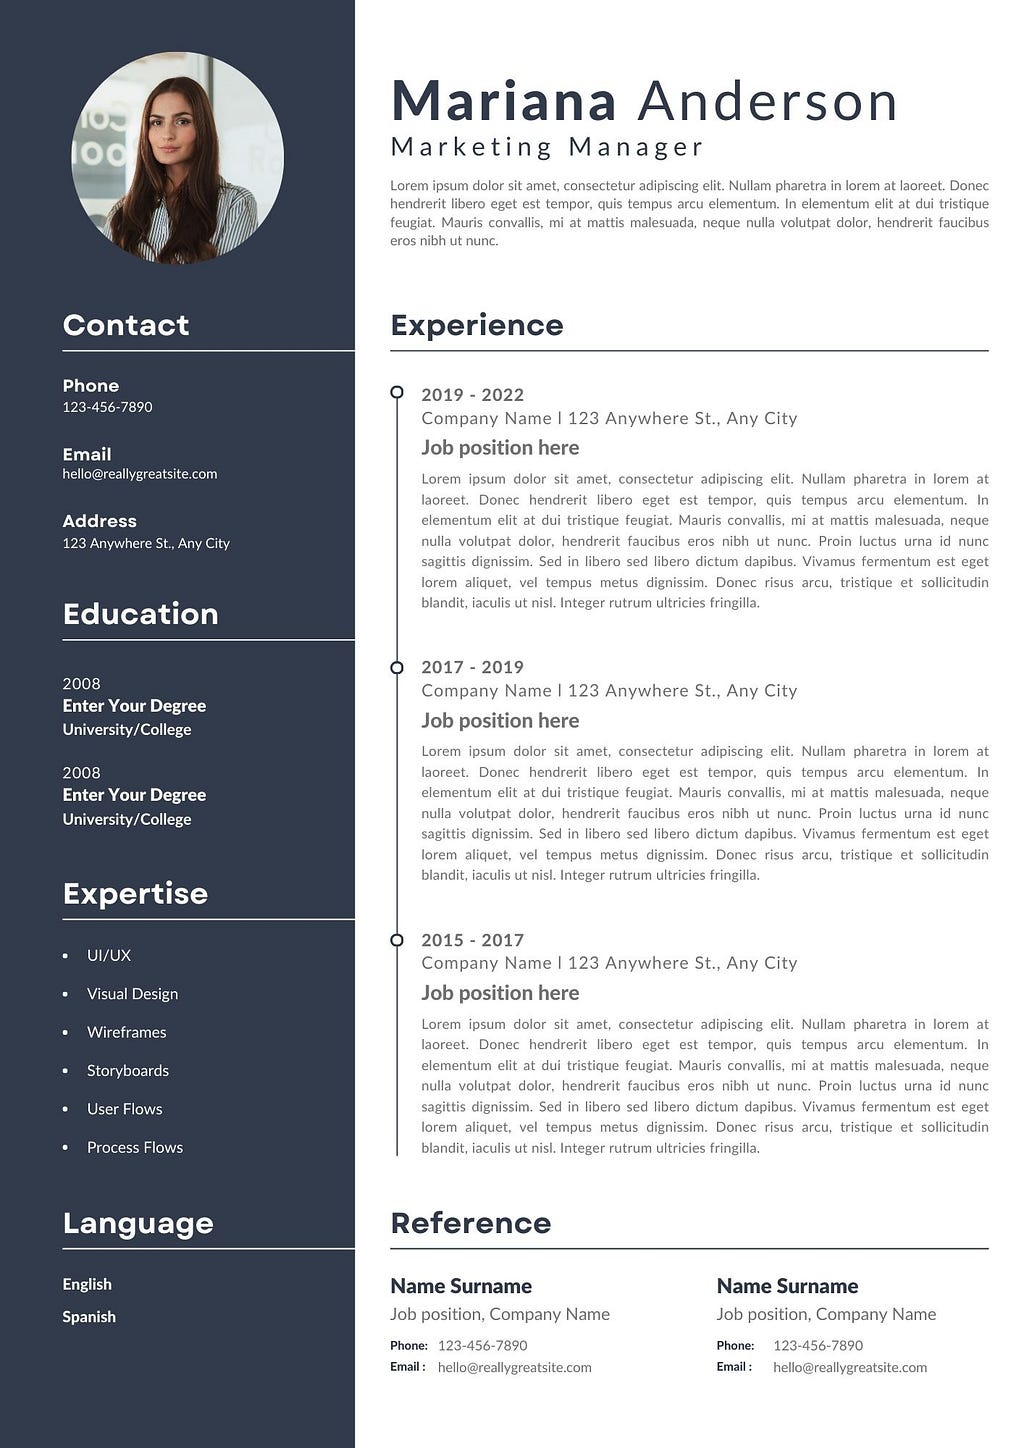 Alt Text: A CV template from Canva with a neutral, navy and off-white colour palette. It has space for you to add a professional photo and currently has an example photo of a woman with a neutral expression, she has brown hair and a black and white pinstripe shirt on; her name in the example is “Mariana Anderson” and she is a “Marketing Manager”. It has plenty of space for copy so you could write at length about your work experience and skills. The example copy is in ‘Lorem Ipsum’ latin.